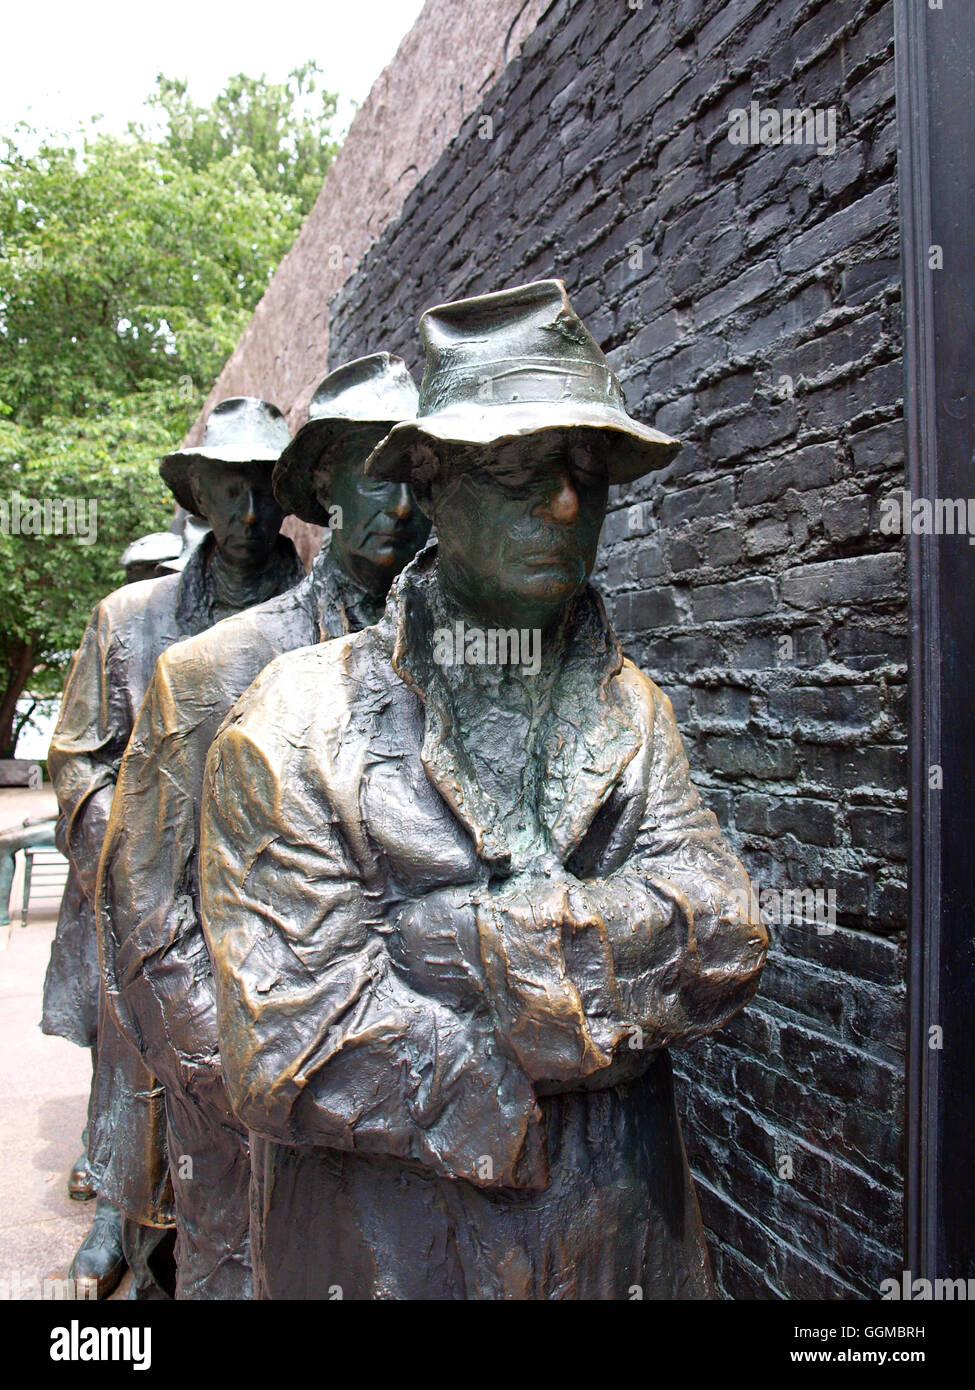 statues of unemployed men standing in a bread line during the Great Depression at the FDR Memorial in Washington, D.C. Stock Photo